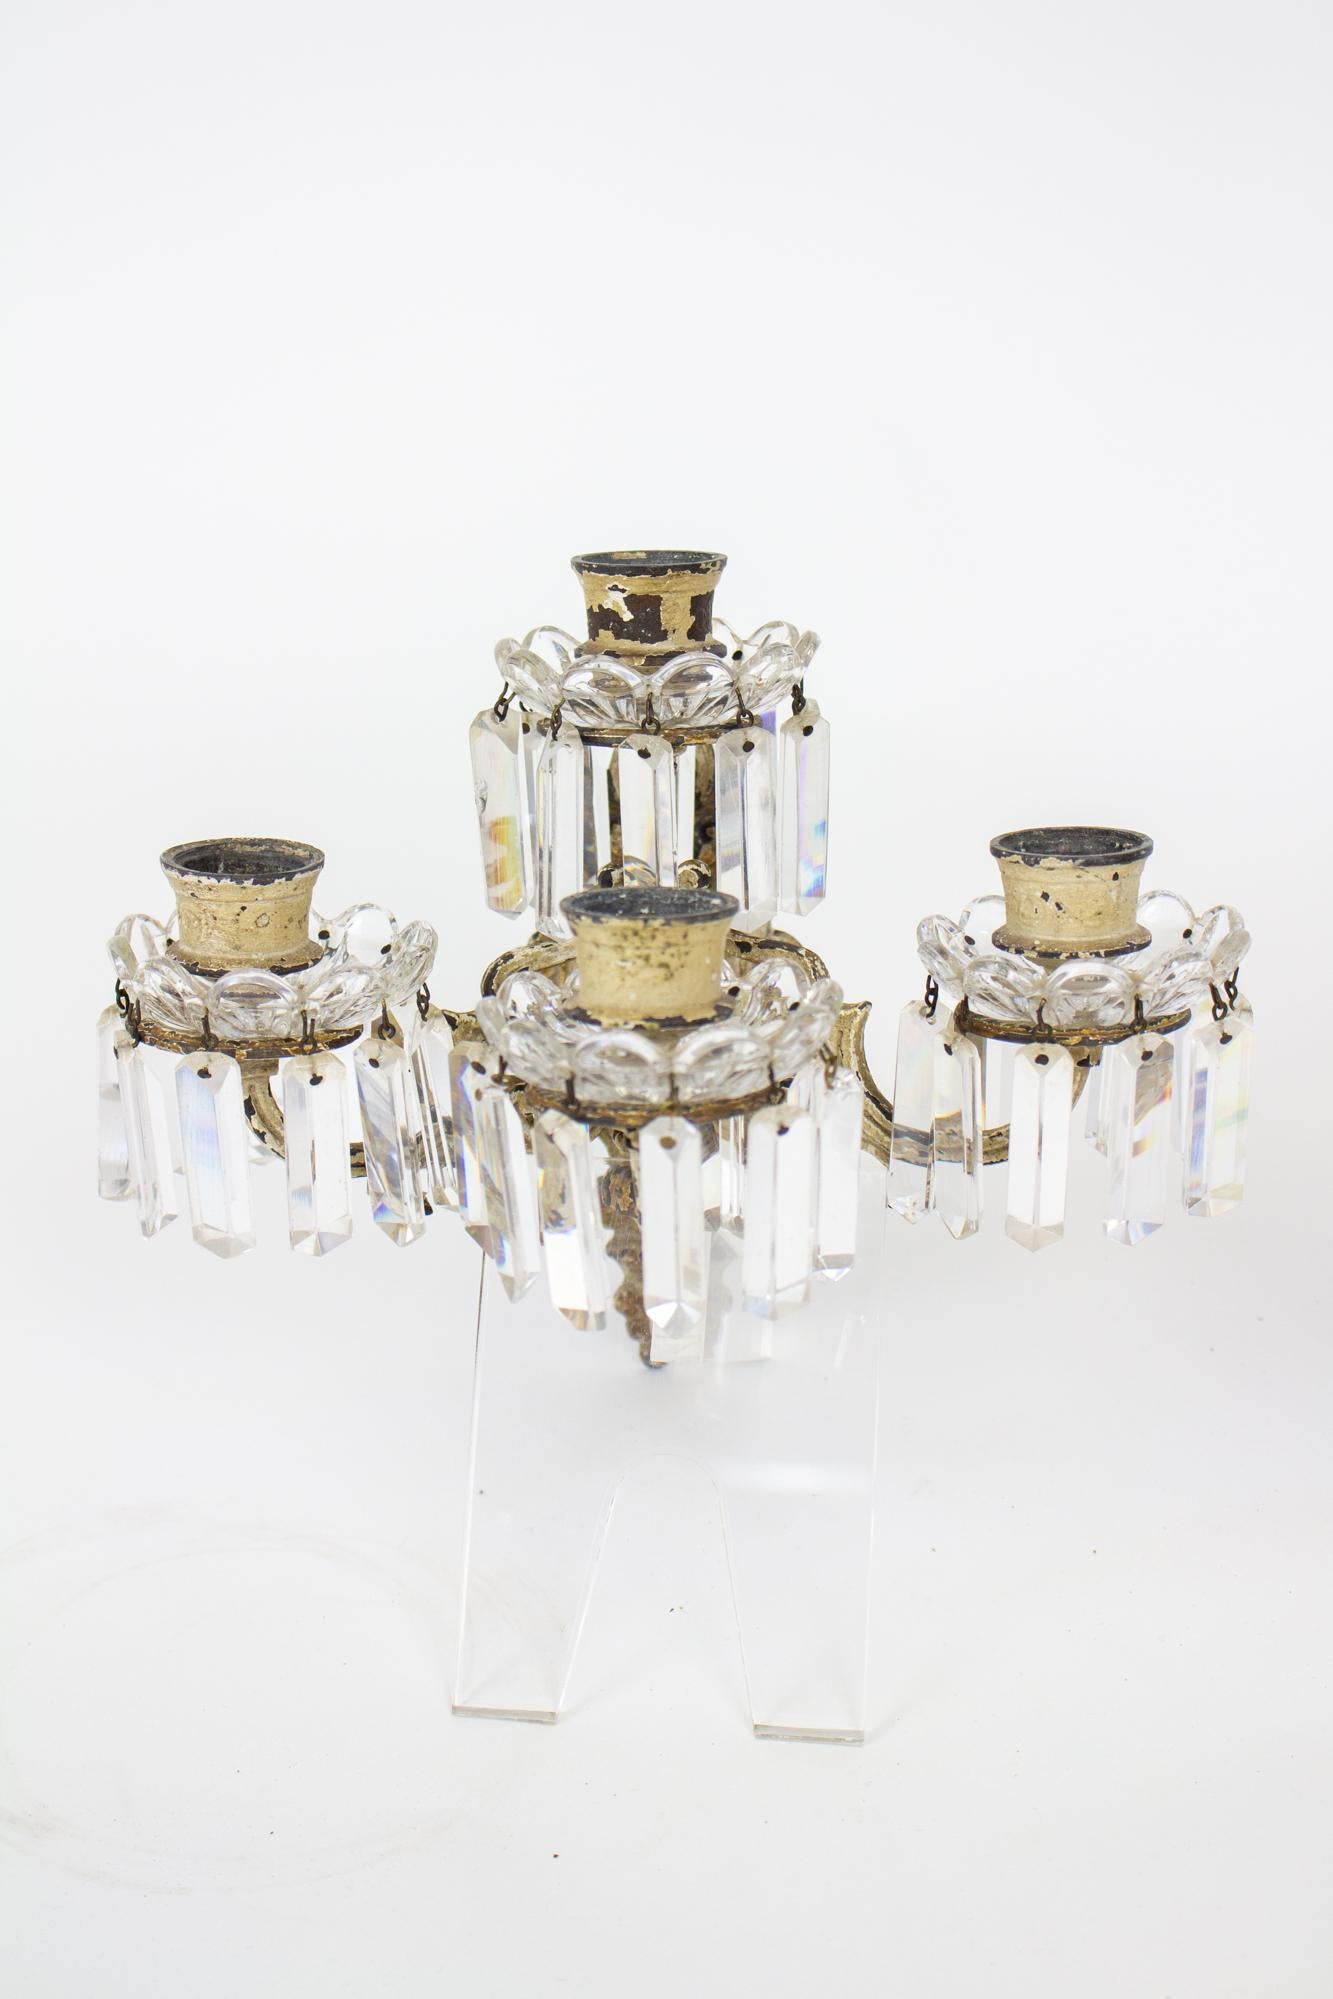 19th Century Painted Brass and Crystal Four Arm Baccarat Candle Sconces - a Pair For Sale 5